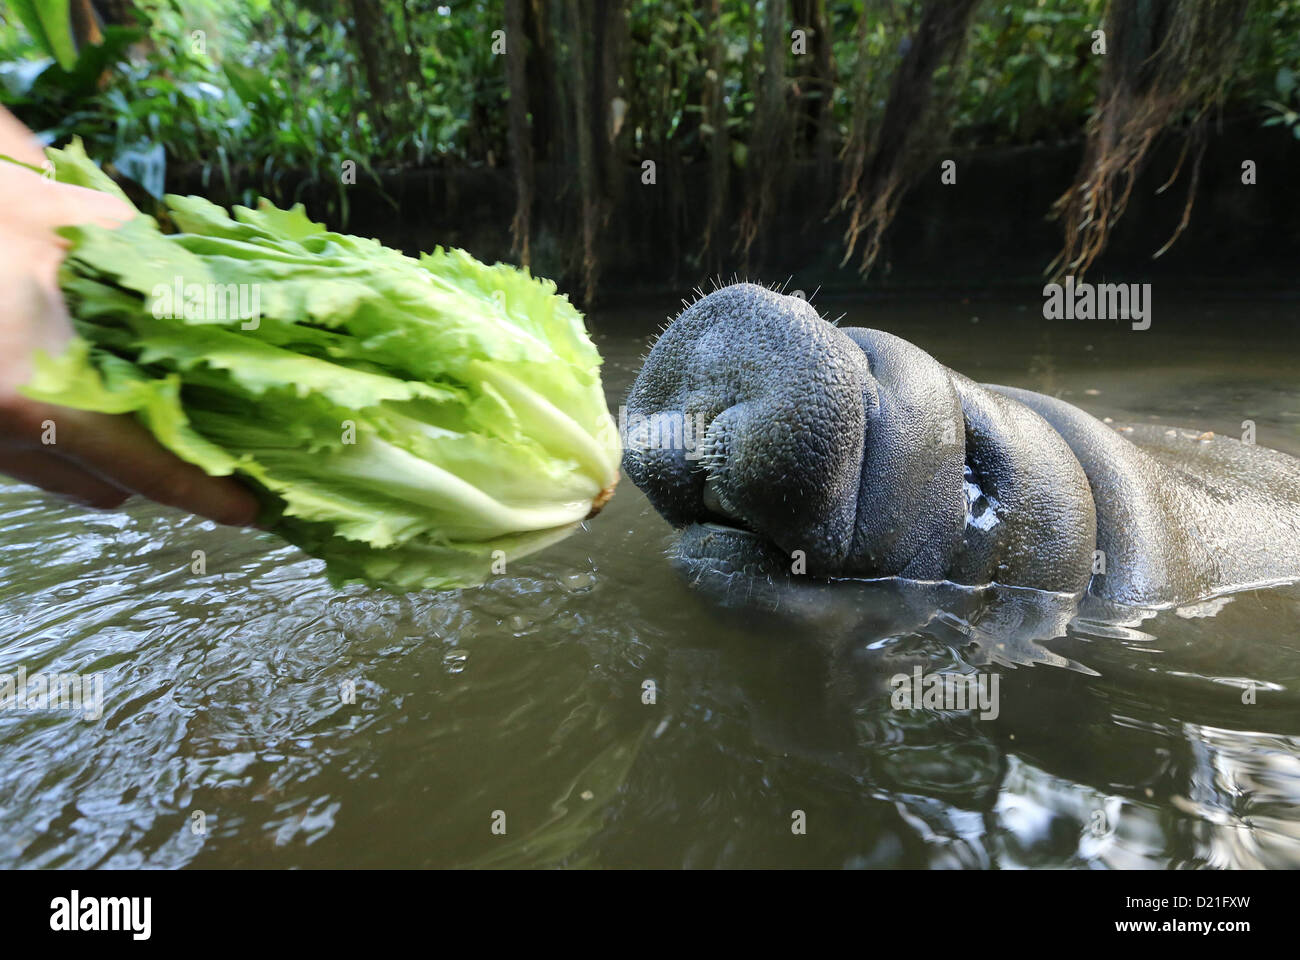 A manatee is fed endives at the Burgers' Zoo in Arnhem, Netherlands, 10 January 2013. The three manatees living at the zoo consume 90 pounds of endives every day and, for a change, carrots and beets. Photo: VidiPhoto - NETHERLANDS OUT Stock Photo